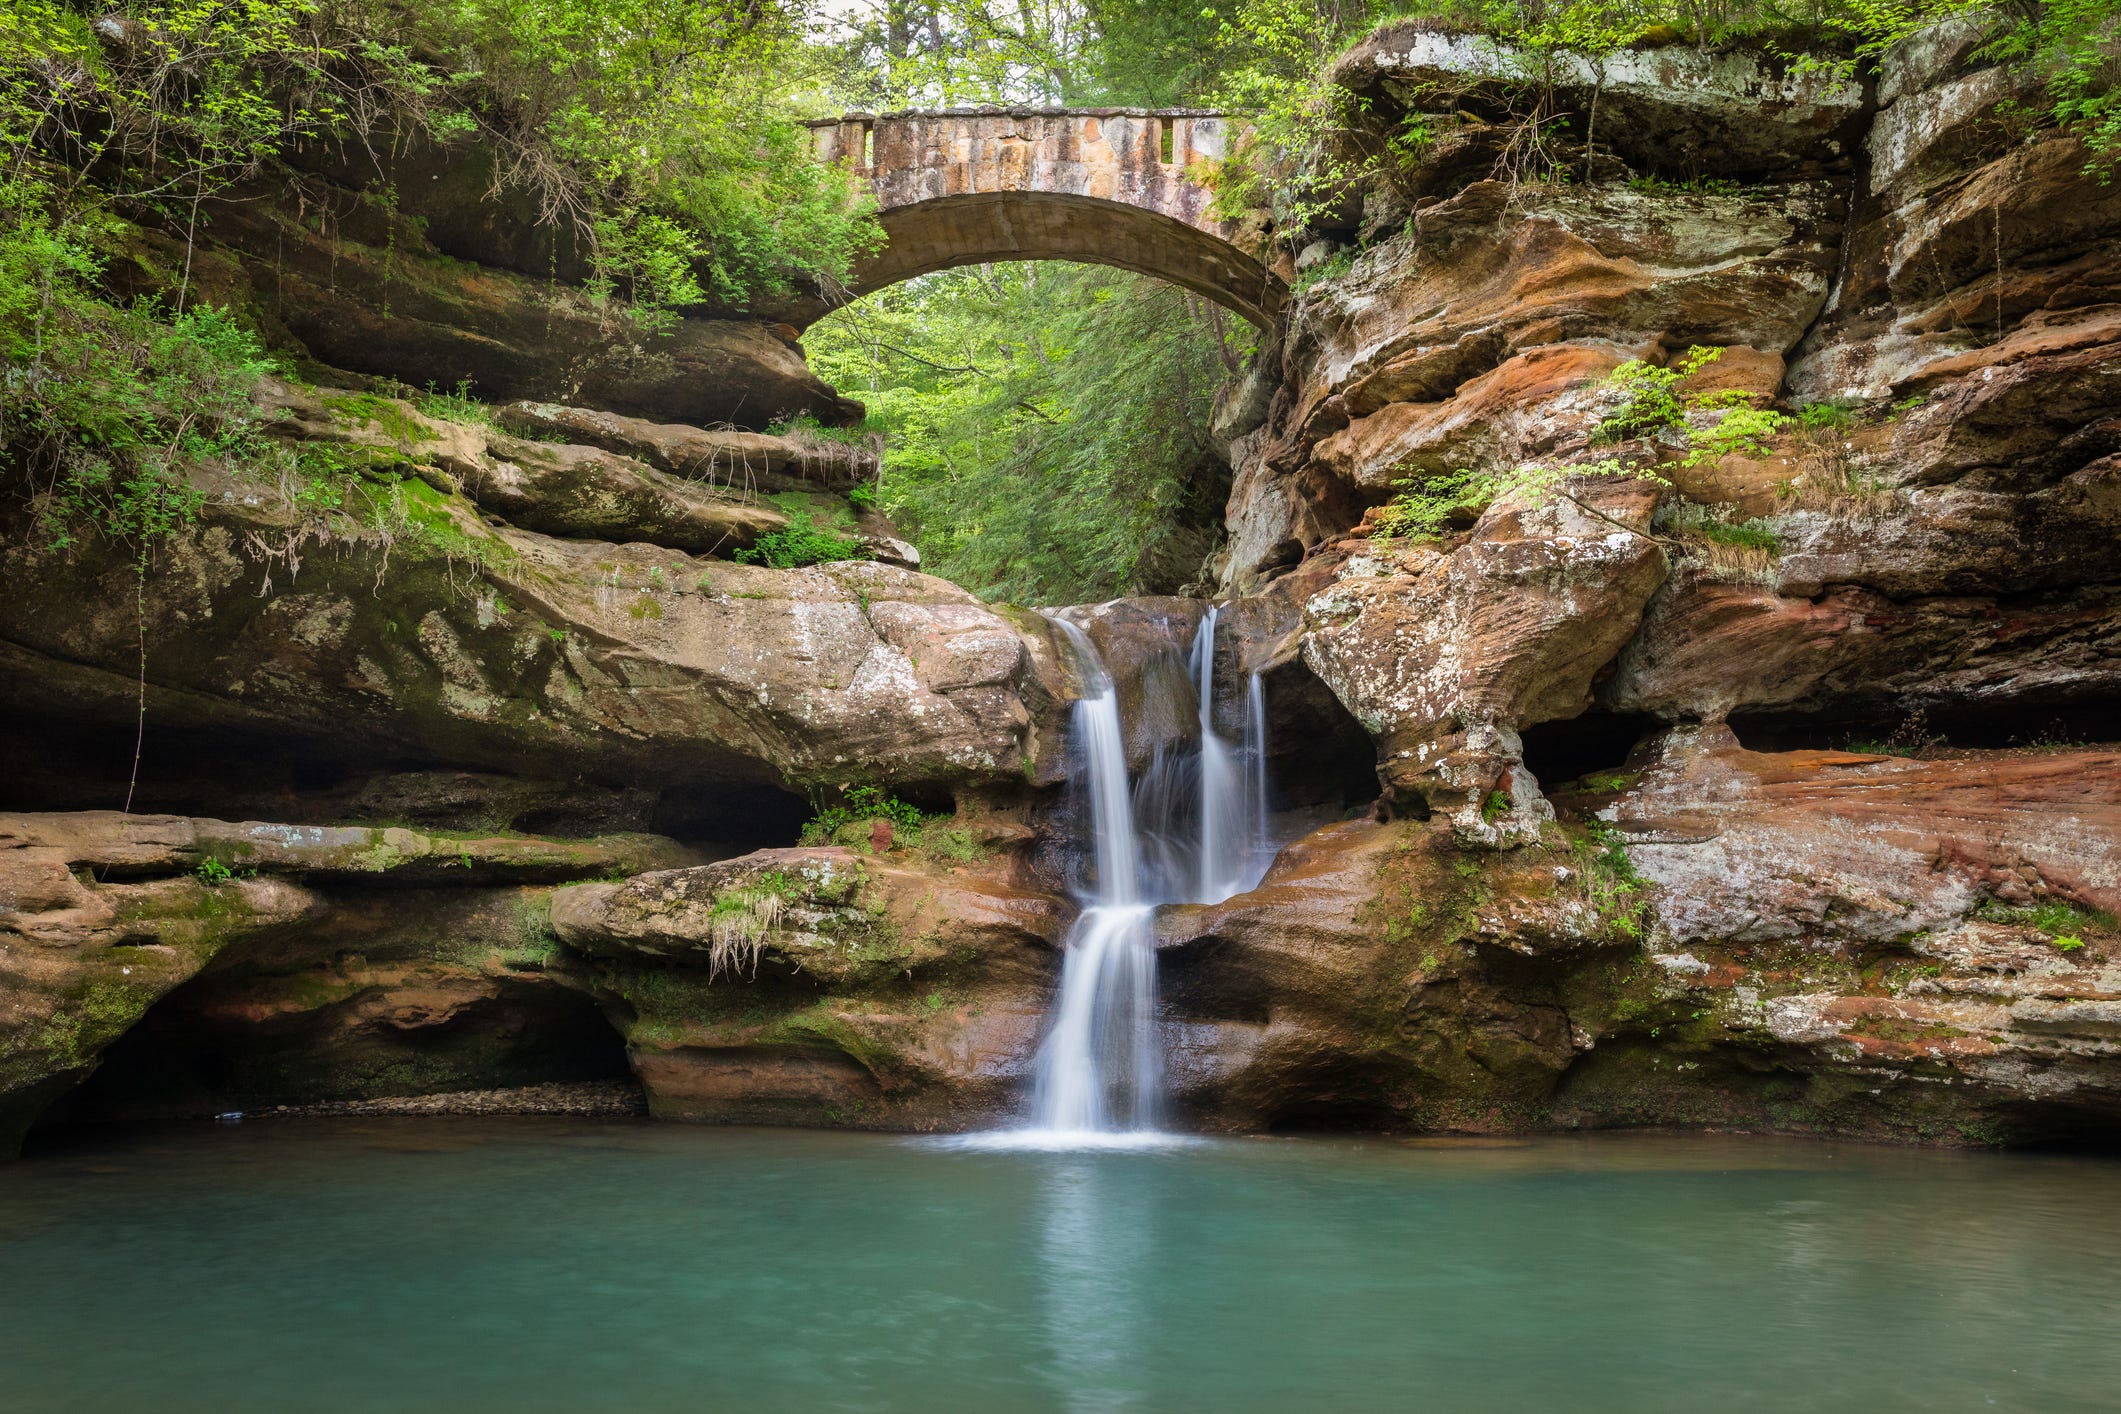 <p><a href="https://travel.usnews.com/rankings/best-places-to-visit-in-ohio/" rel="noopener">US News and World Report</a> named Hocking Hills State Park the best place to visit in Ohio.</p>